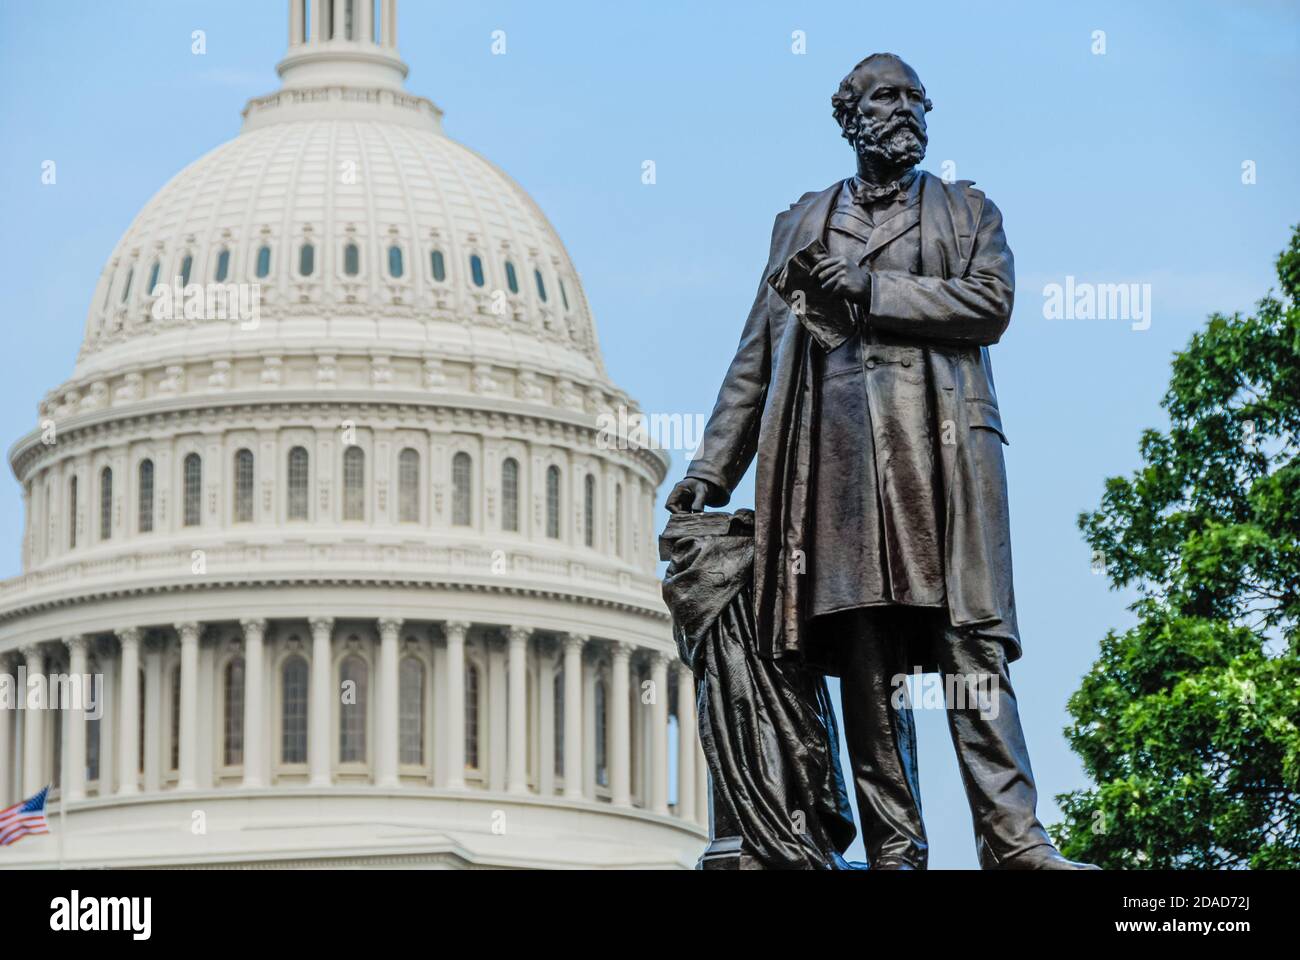 James A. Garfield Monument on the grounds of the U.S. Capitol is a memorial to President Garfield, elected in 1880 and assassinated in 1881. (USA) Stock Photo